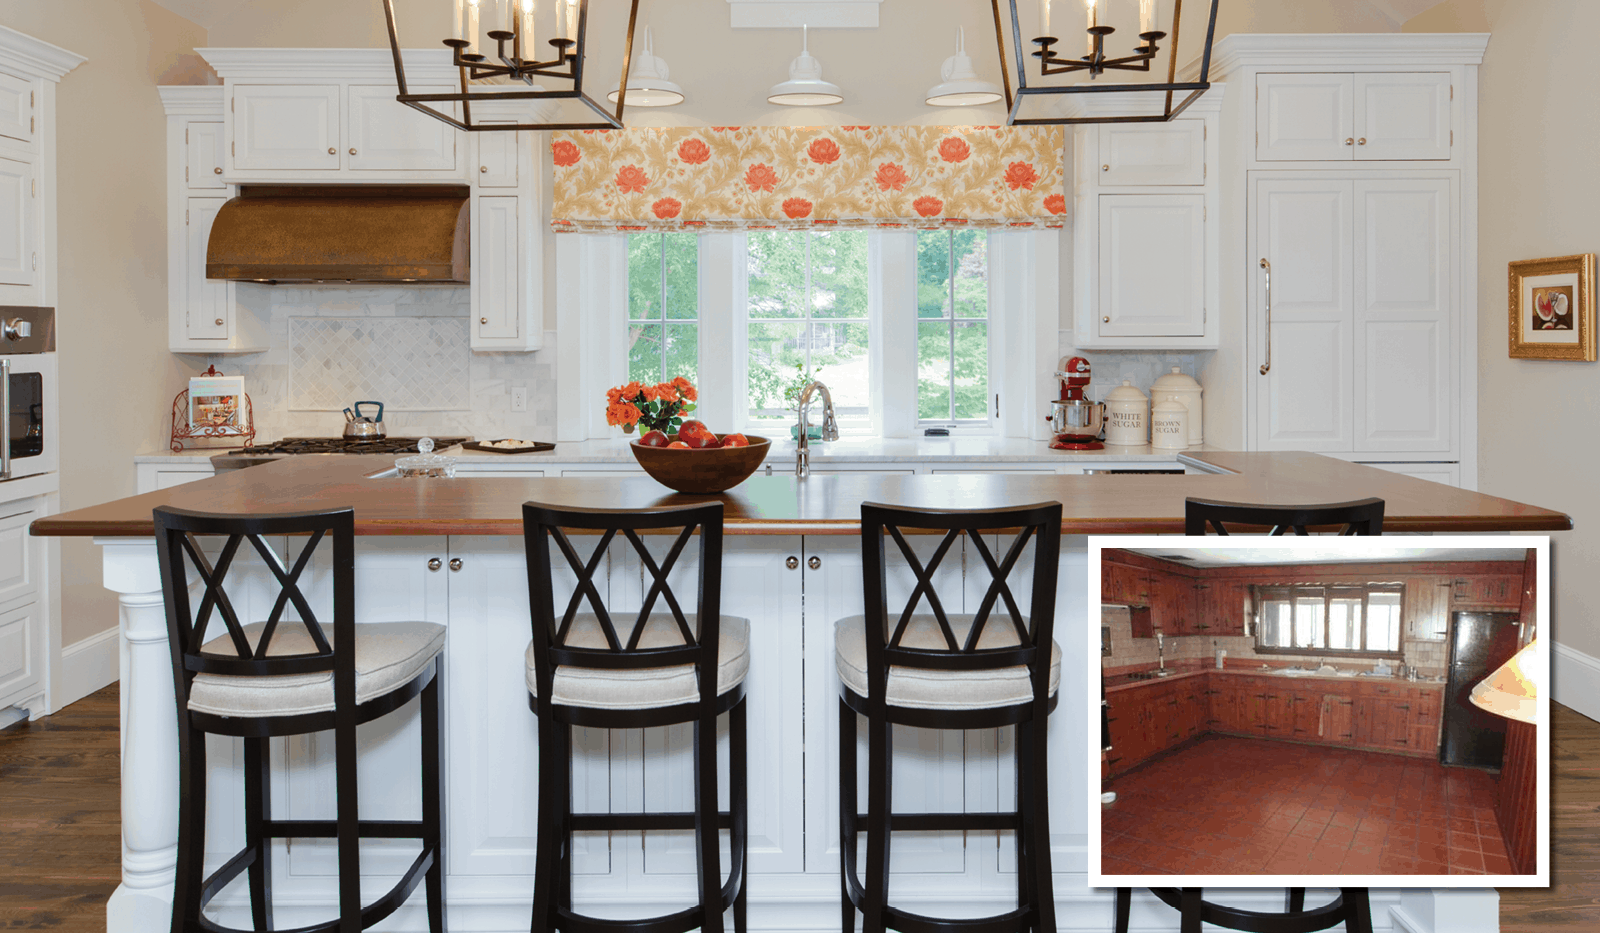 upscale kitchen remodel with white kitchen cabinets and an island